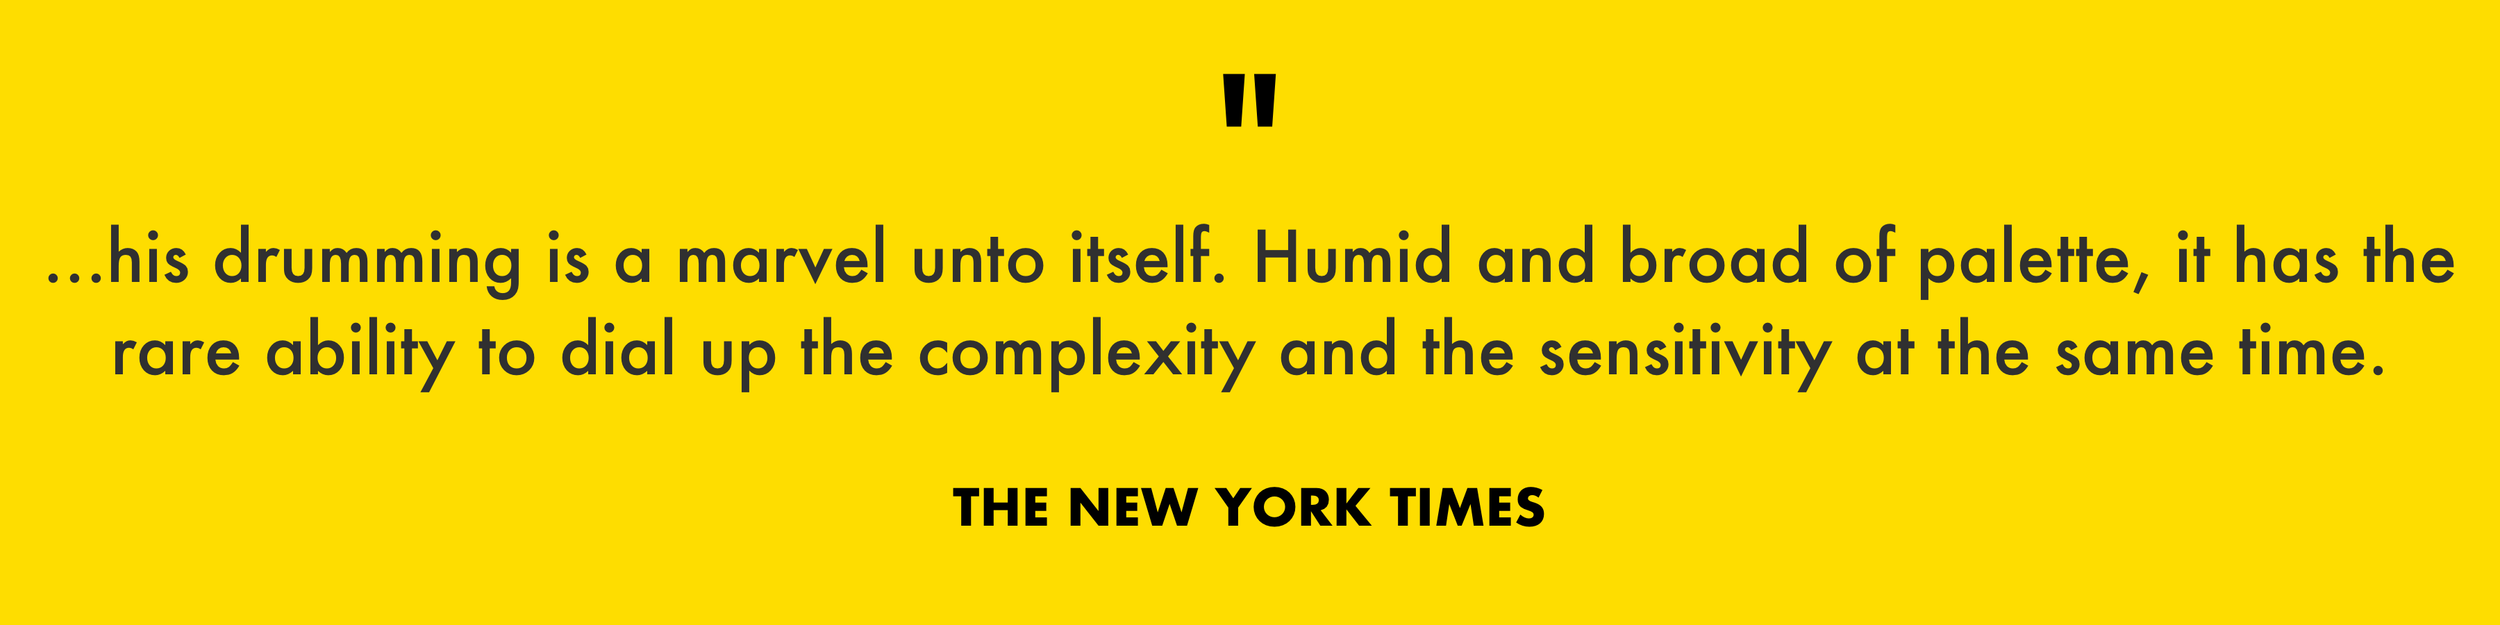 Qoute_NYTimes-yellow.png